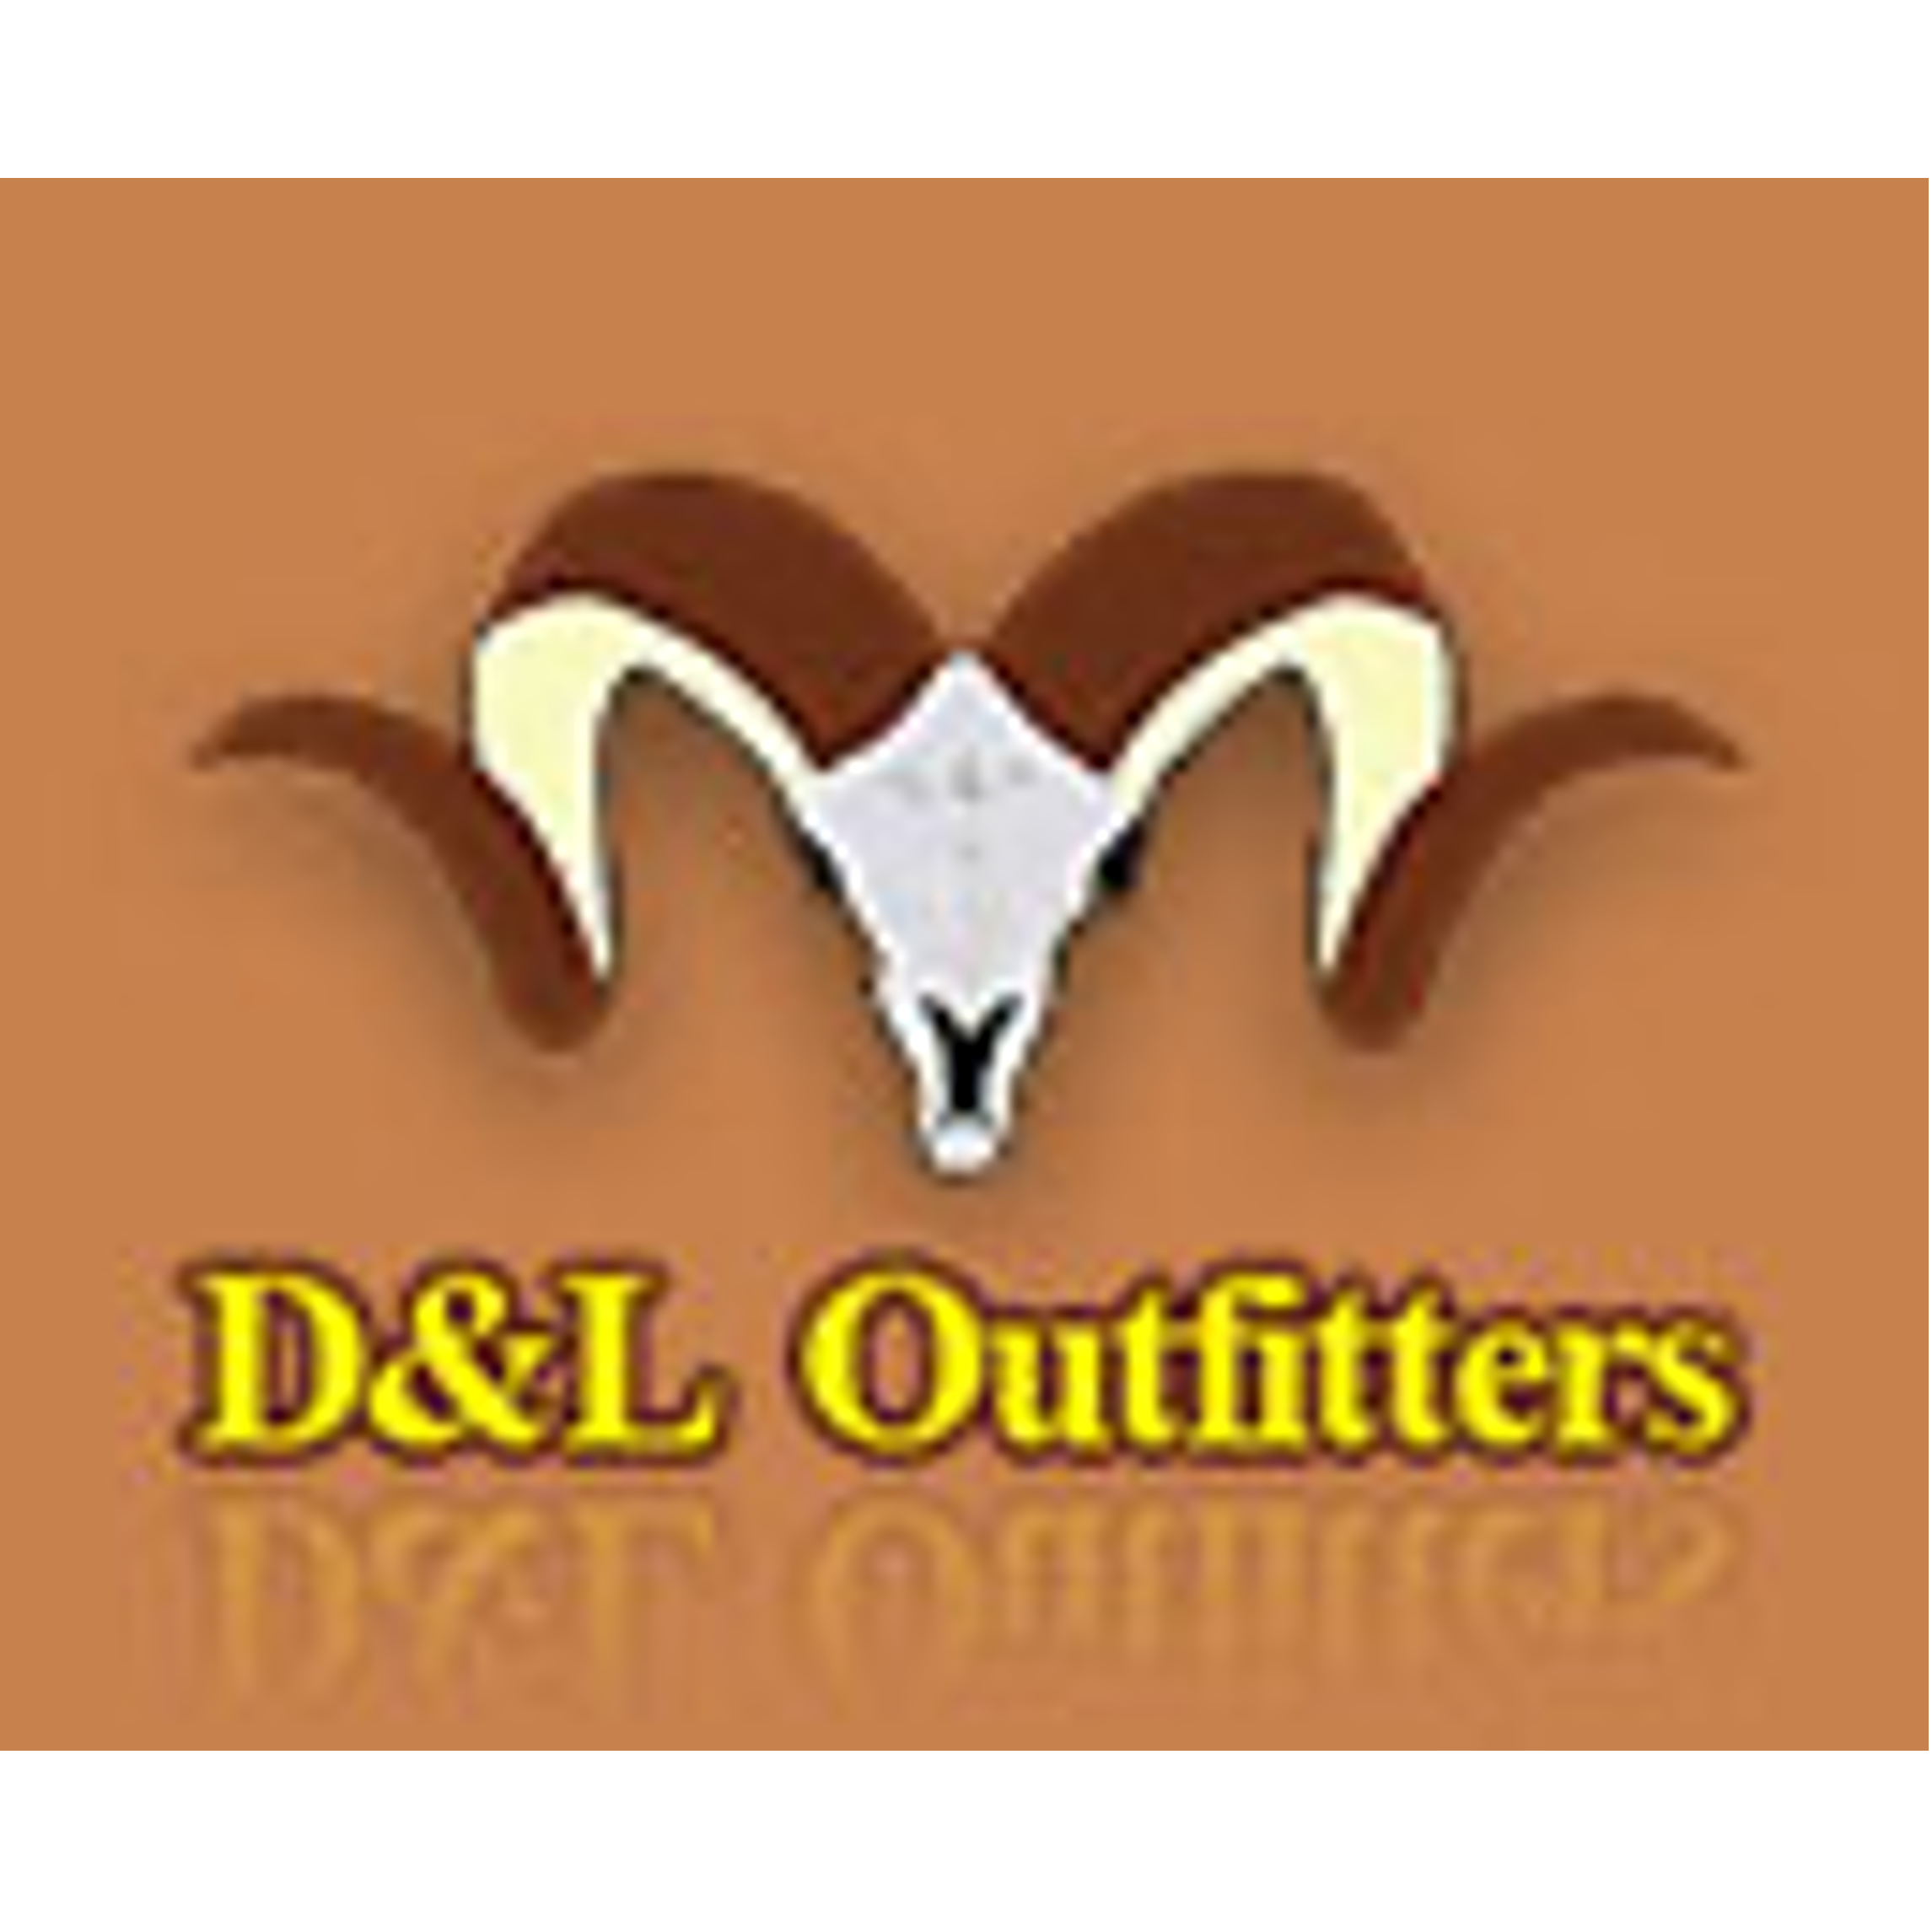 D&L Outfitters